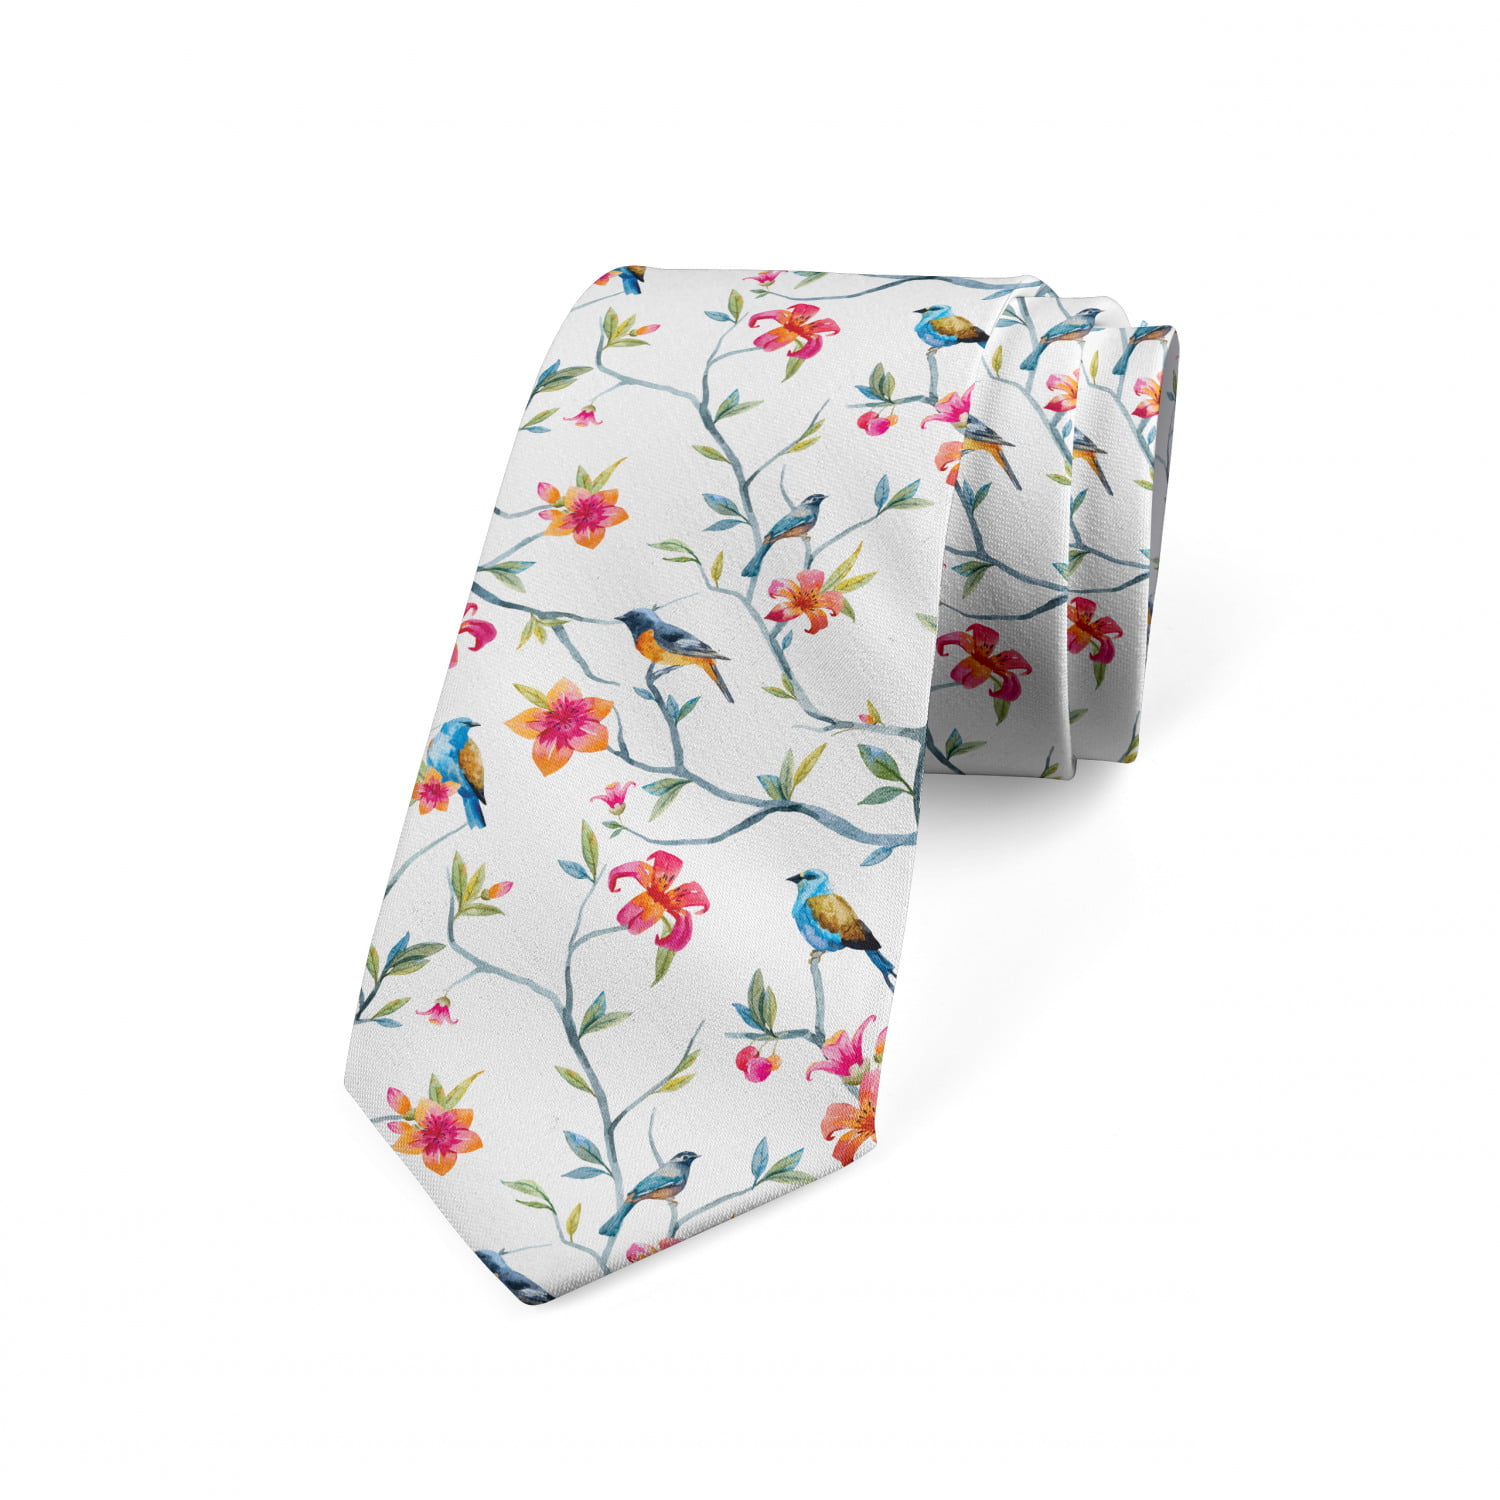 White and Multicolor 3.7 Colorful Floral Girl Motif Ambesonne Necktie 